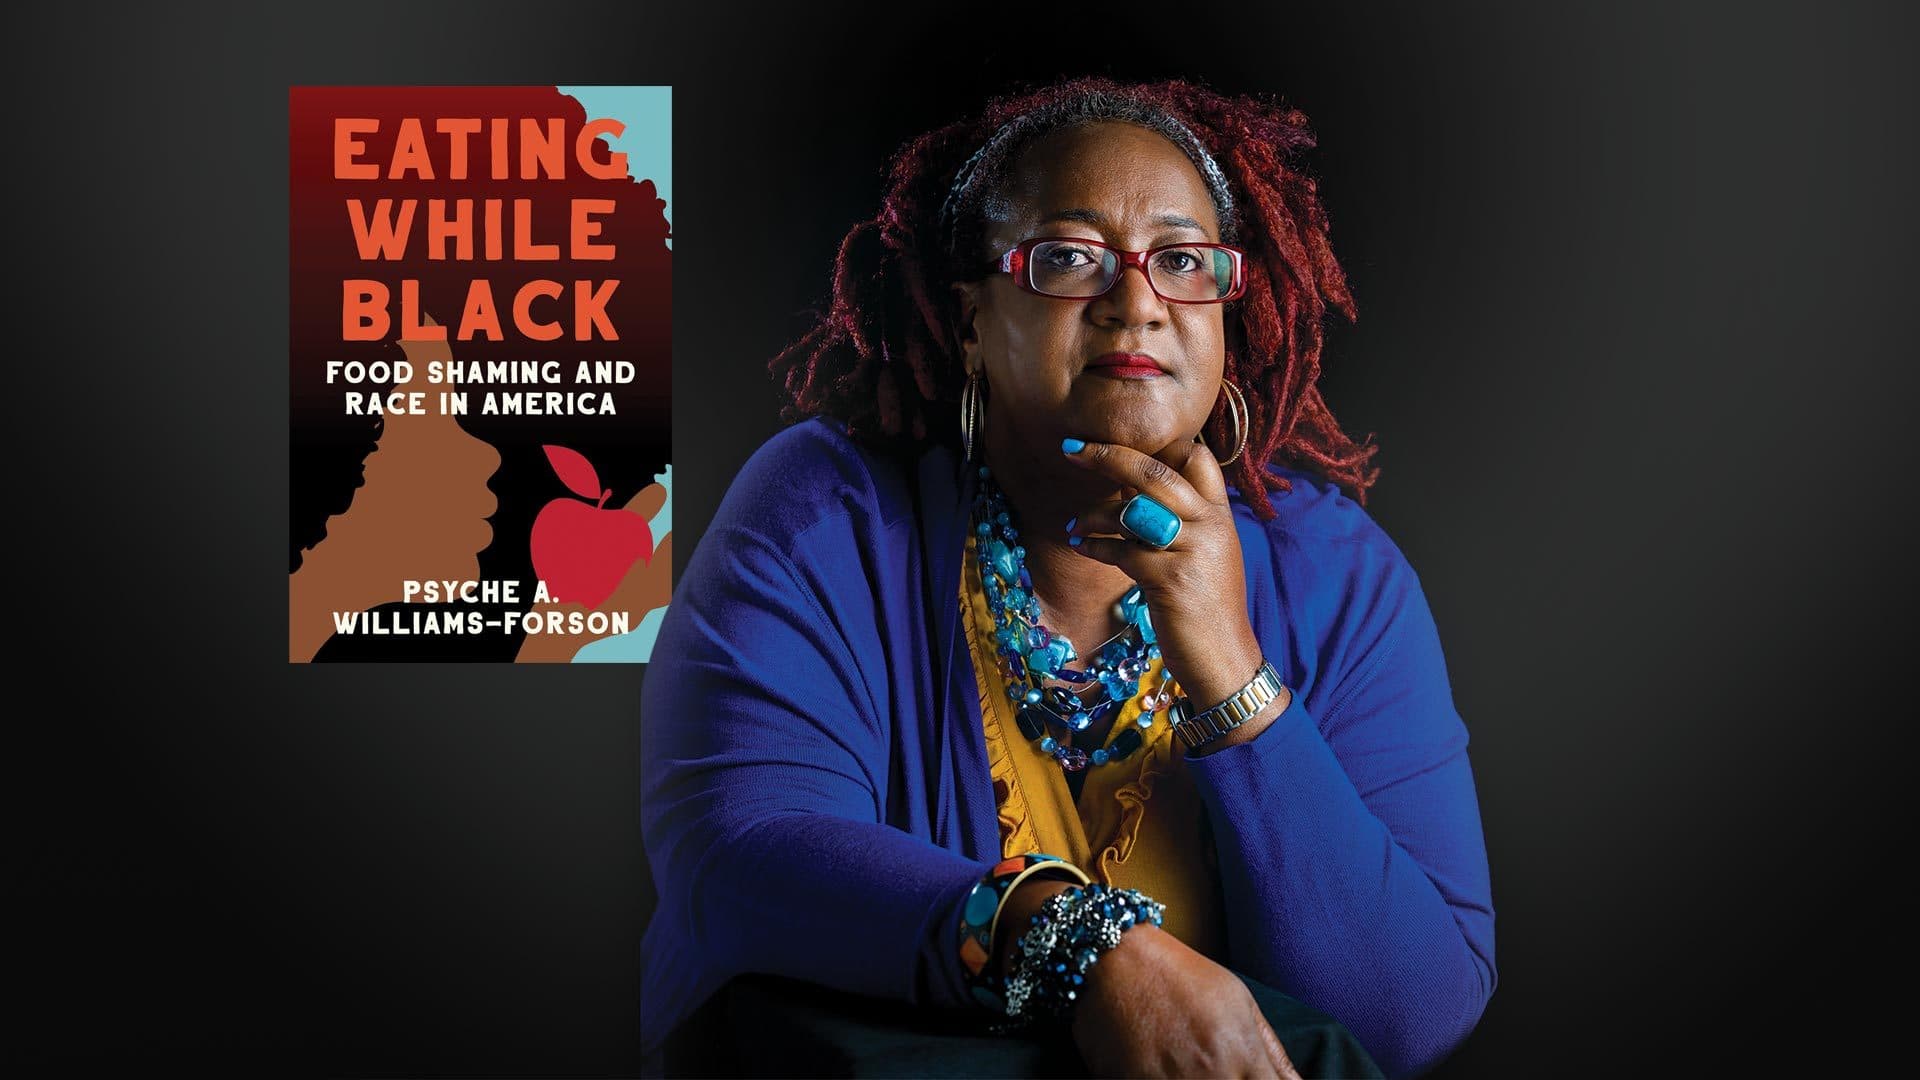 Psyche Williams-Forson portrait, with "Eating While Black" book cover